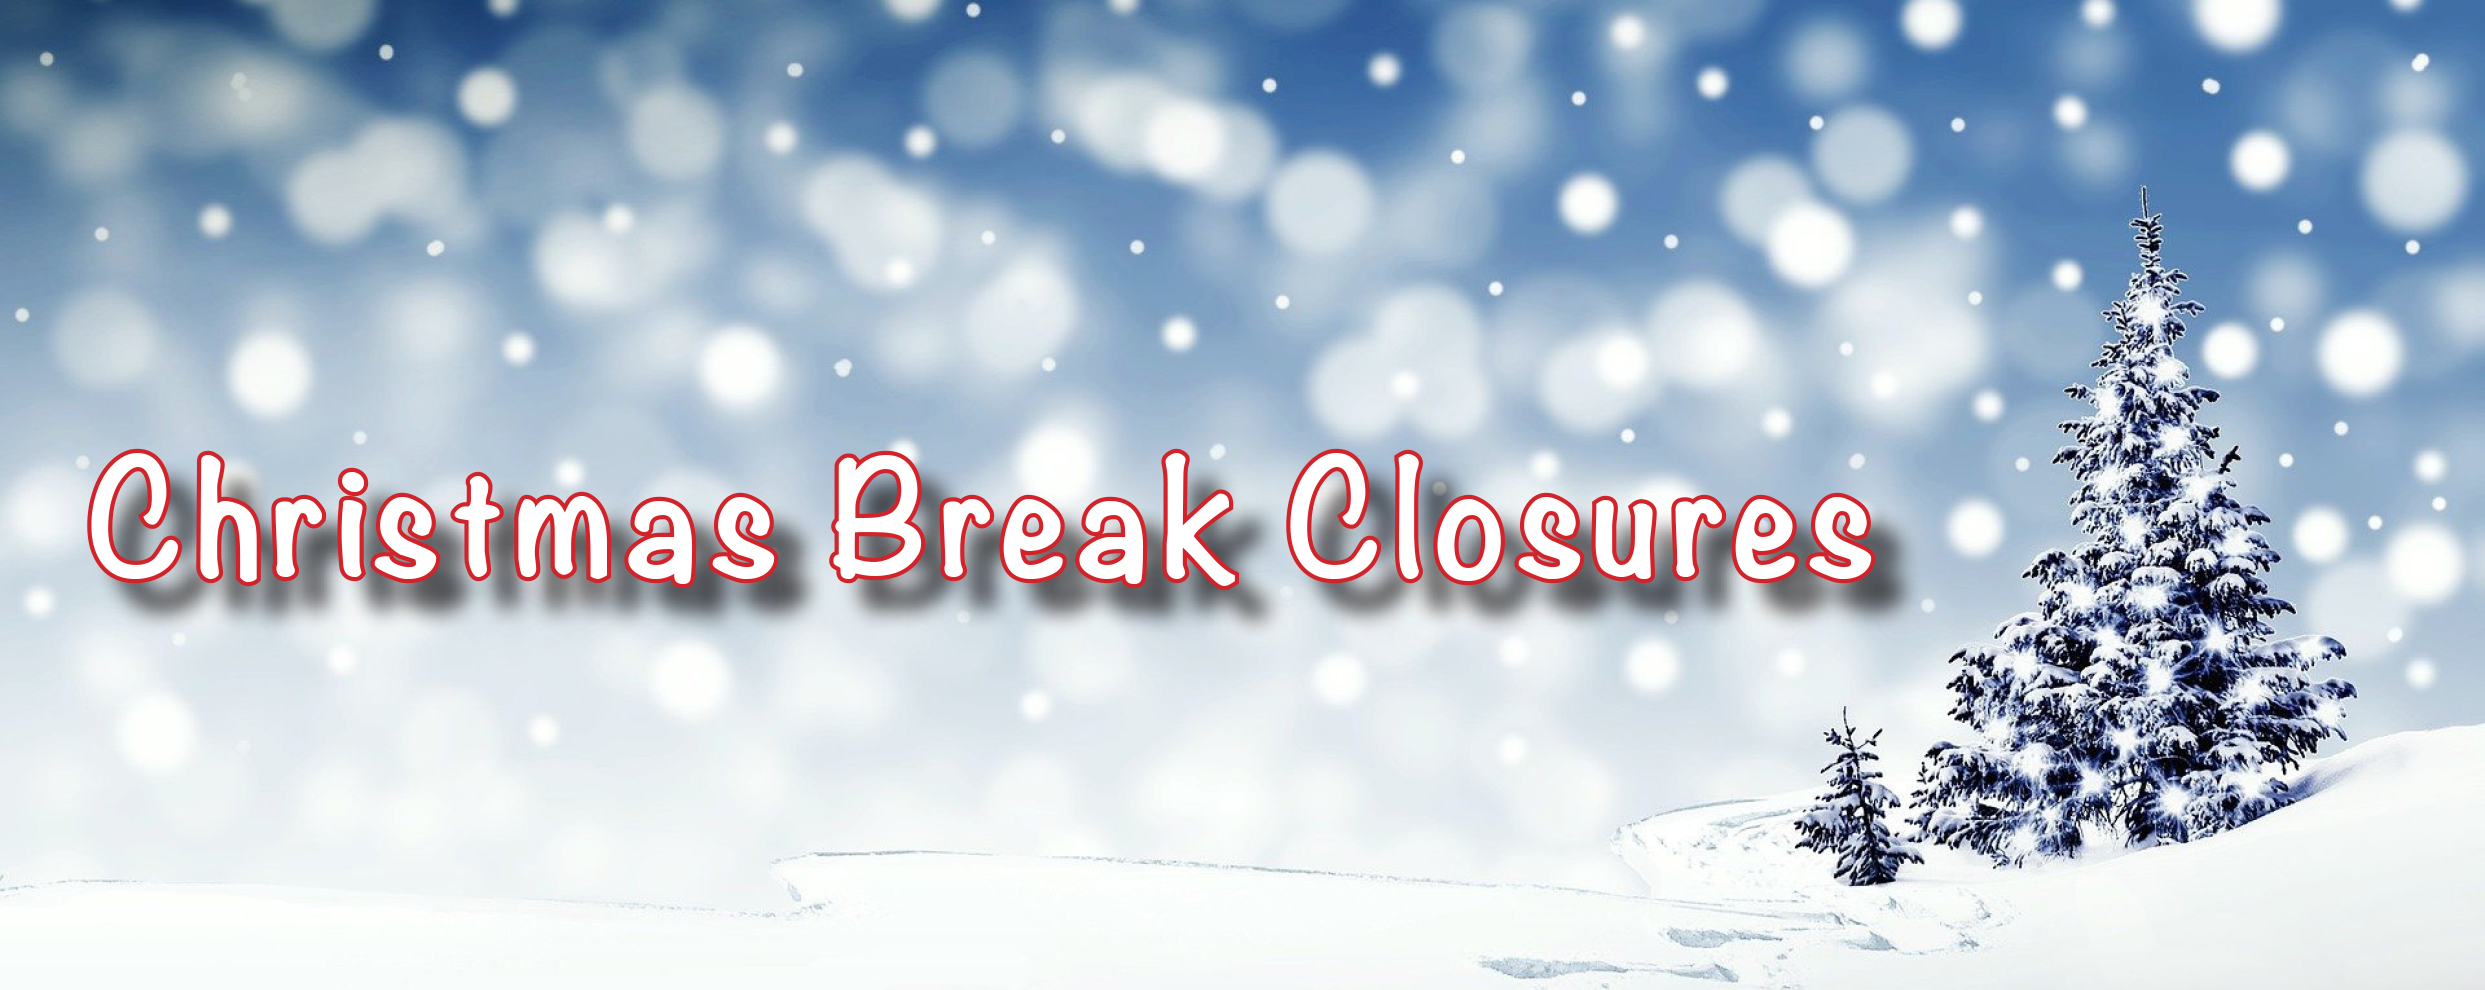 holiday closure text on snowy background